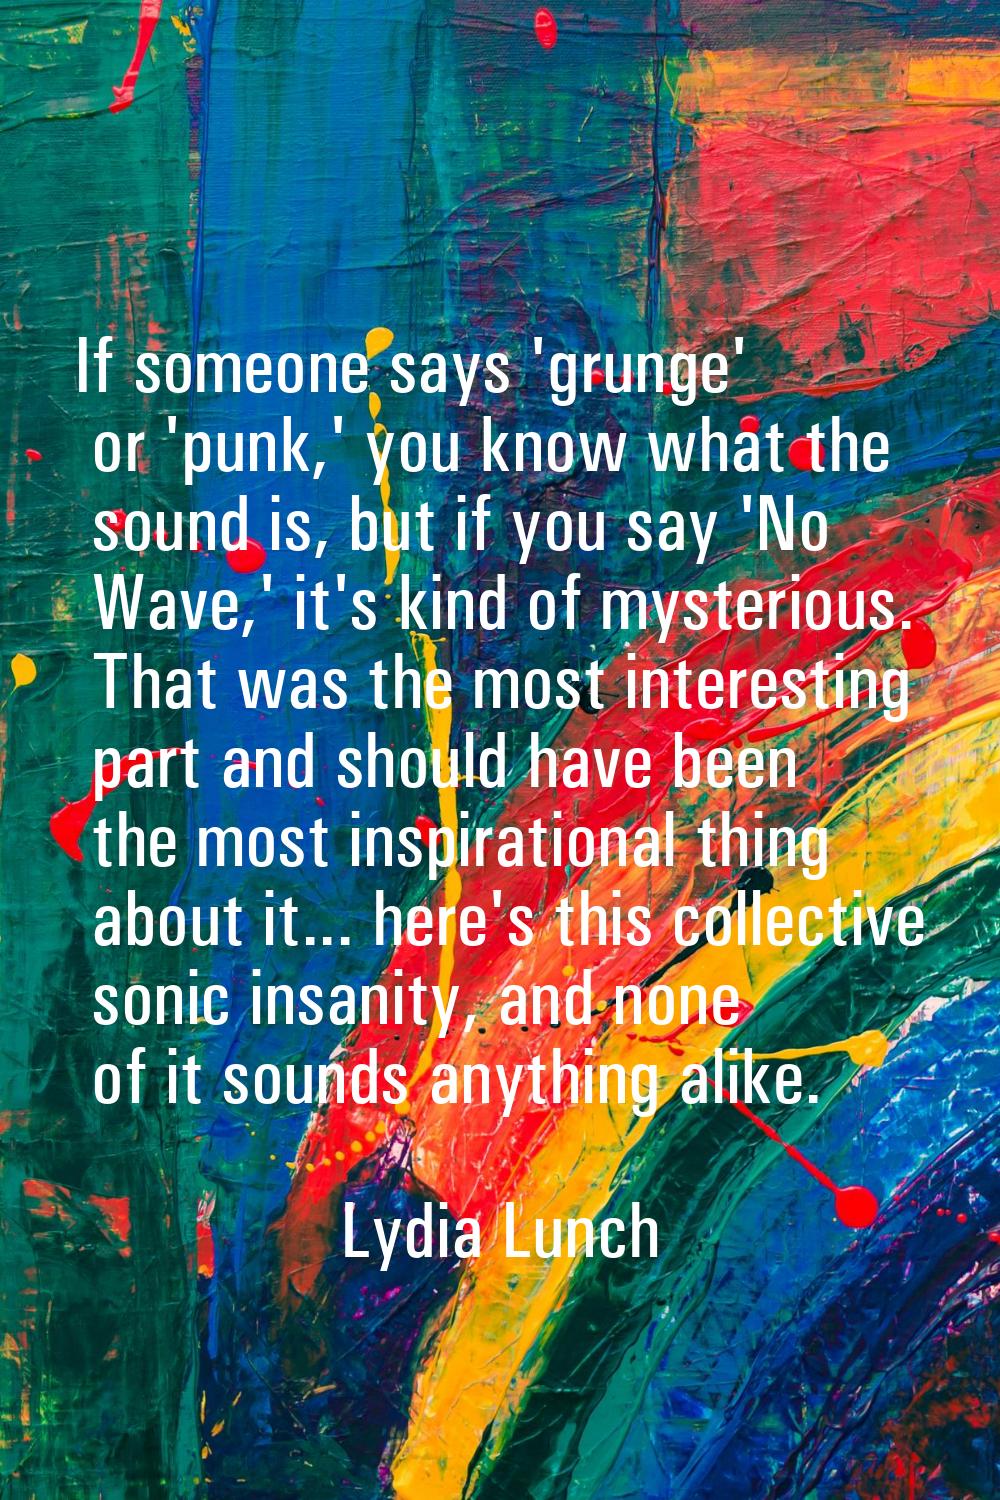 If someone says 'grunge' or 'punk,' you know what the sound is, but if you say 'No Wave,' it's kind